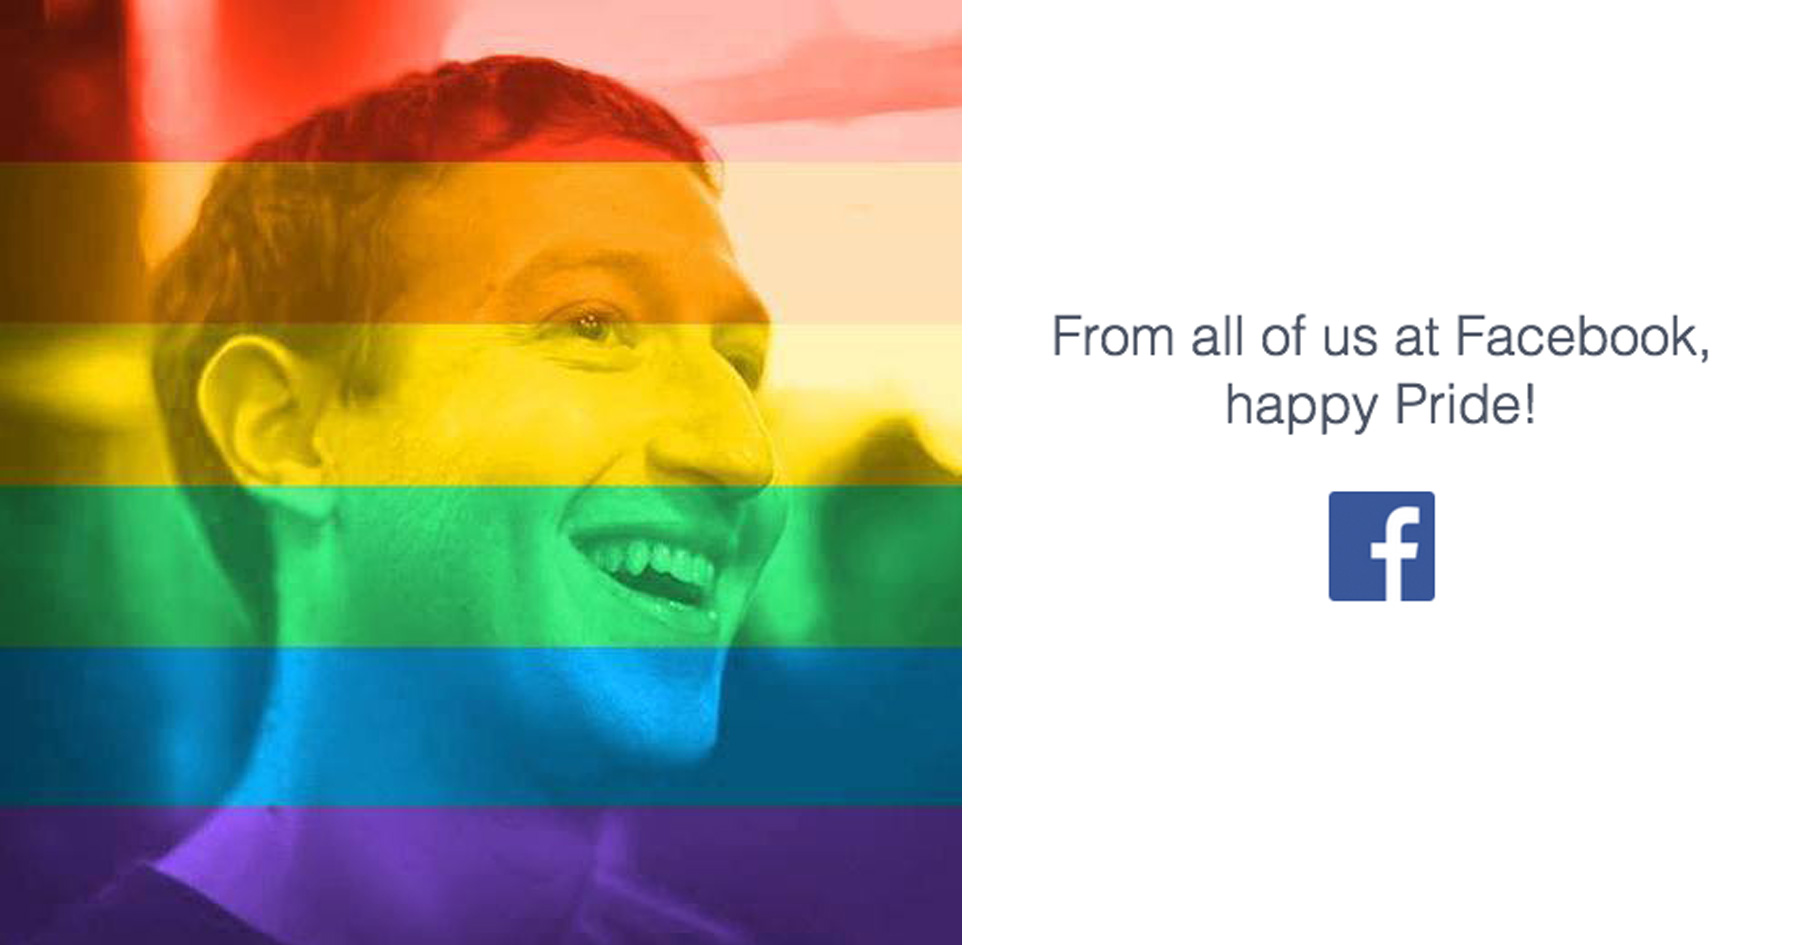 Facebook profile pictures celebrating marriage equality